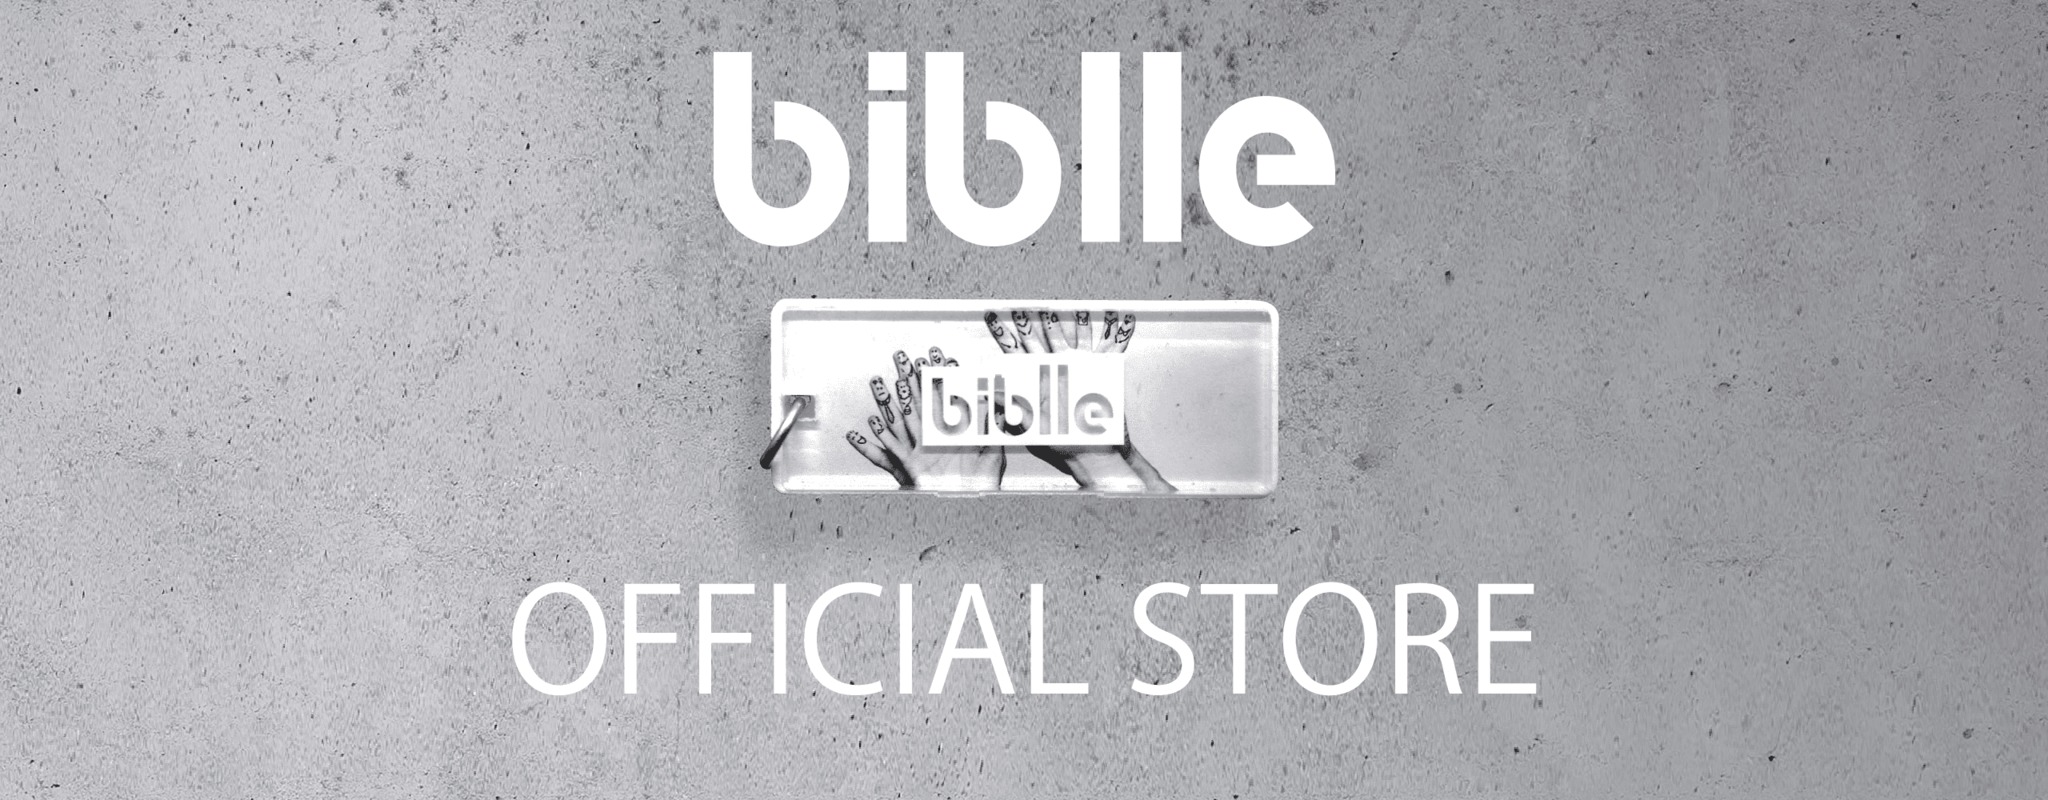 biblle OFFICIAL STORE